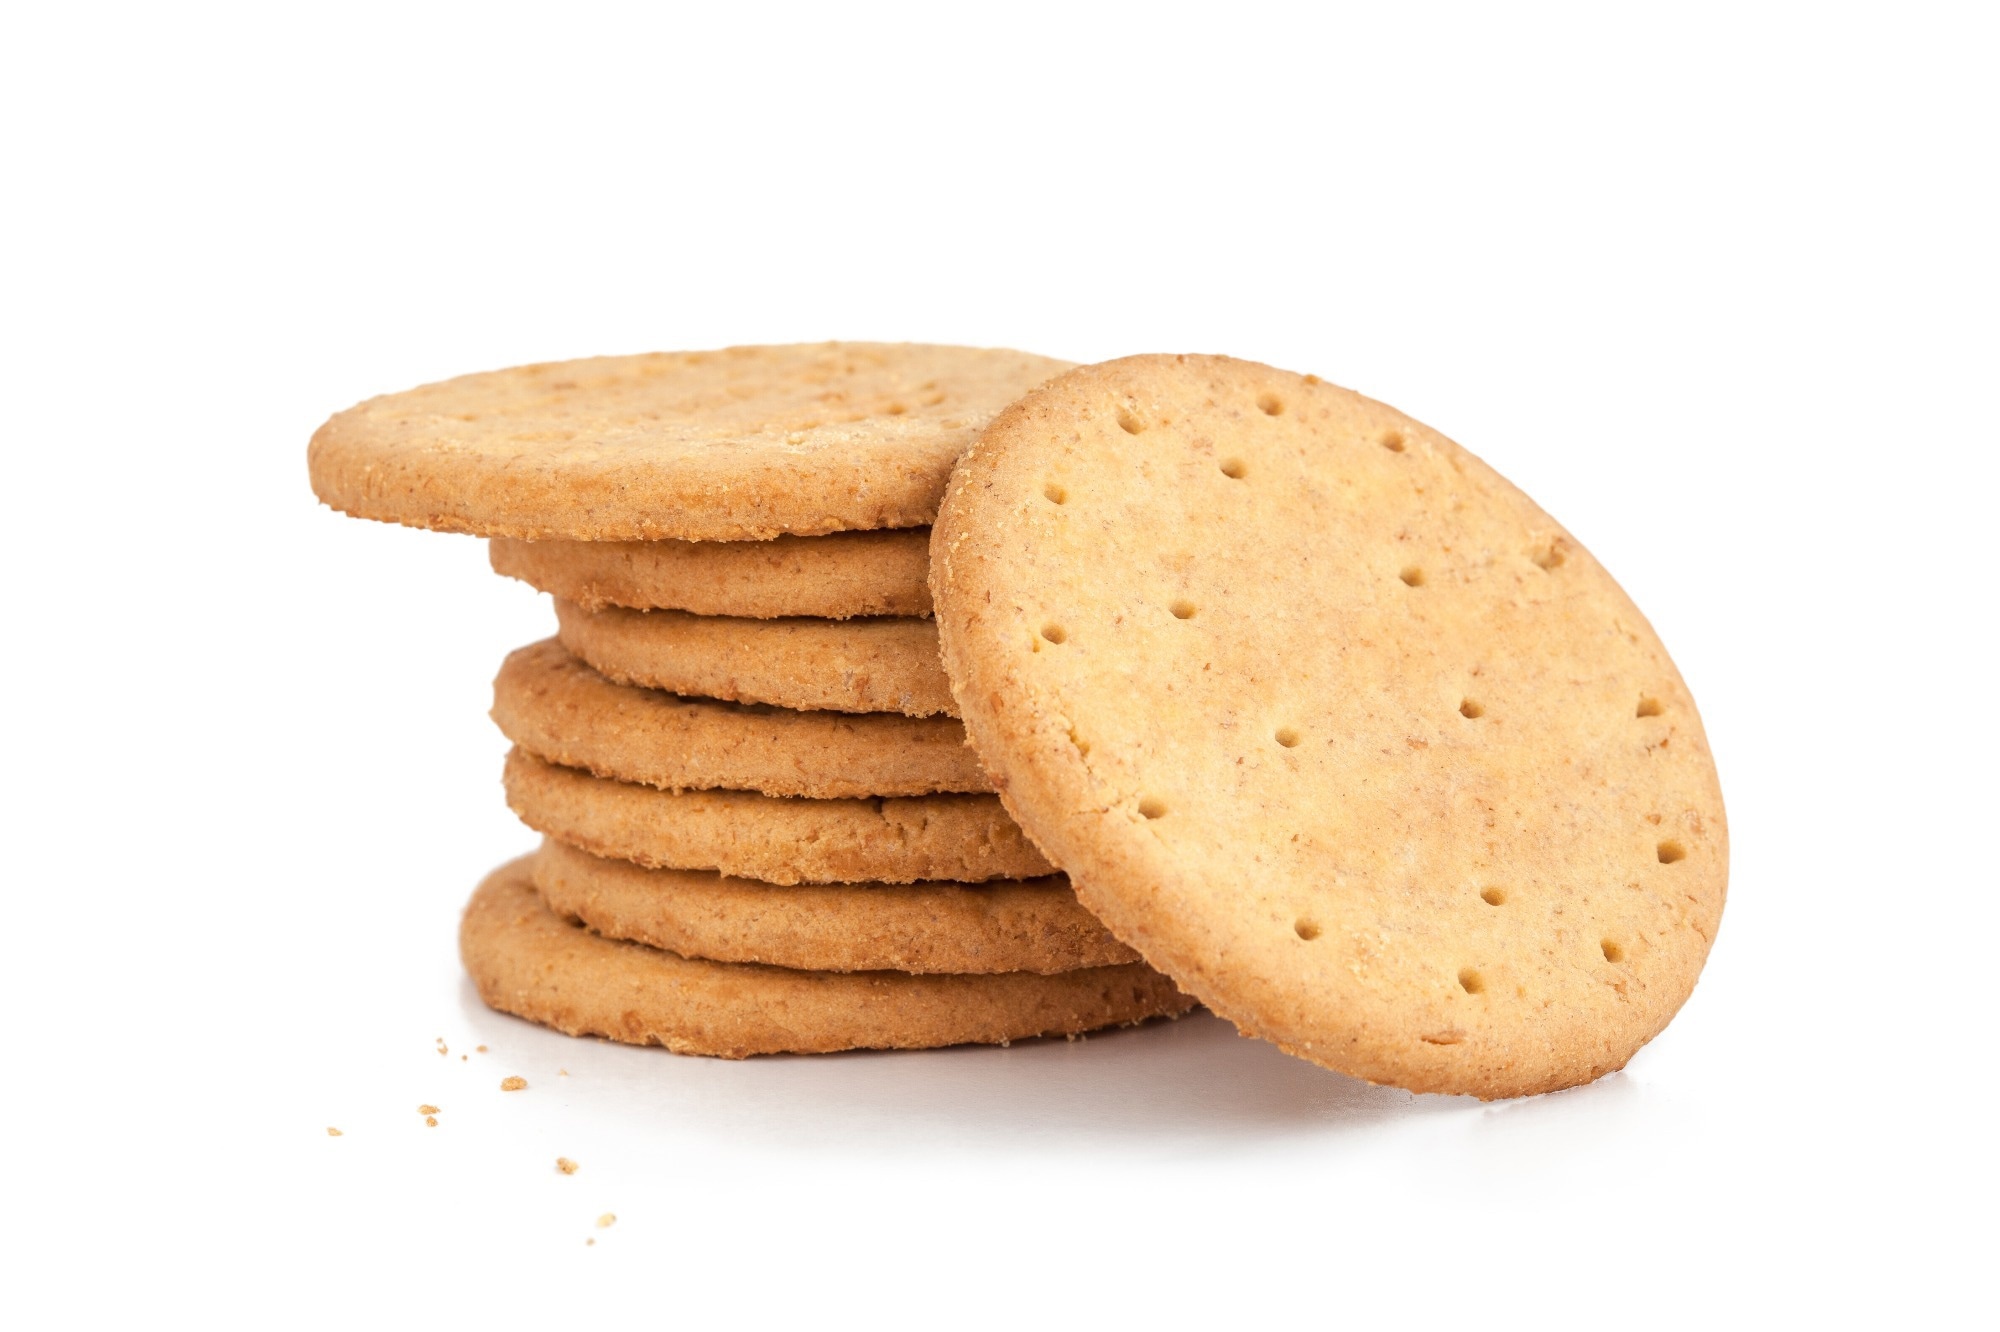 Study: Acute and two-week effects of neotame, stevia rebaudioside M and sucrose-sweetened biscuits on postprandial appetite and endocrine response in adults with overweight/obesity—a randomised crossover trial from the SWEET consortium. Image Credit: Prasert Wongchindawest/Shutterstock.com